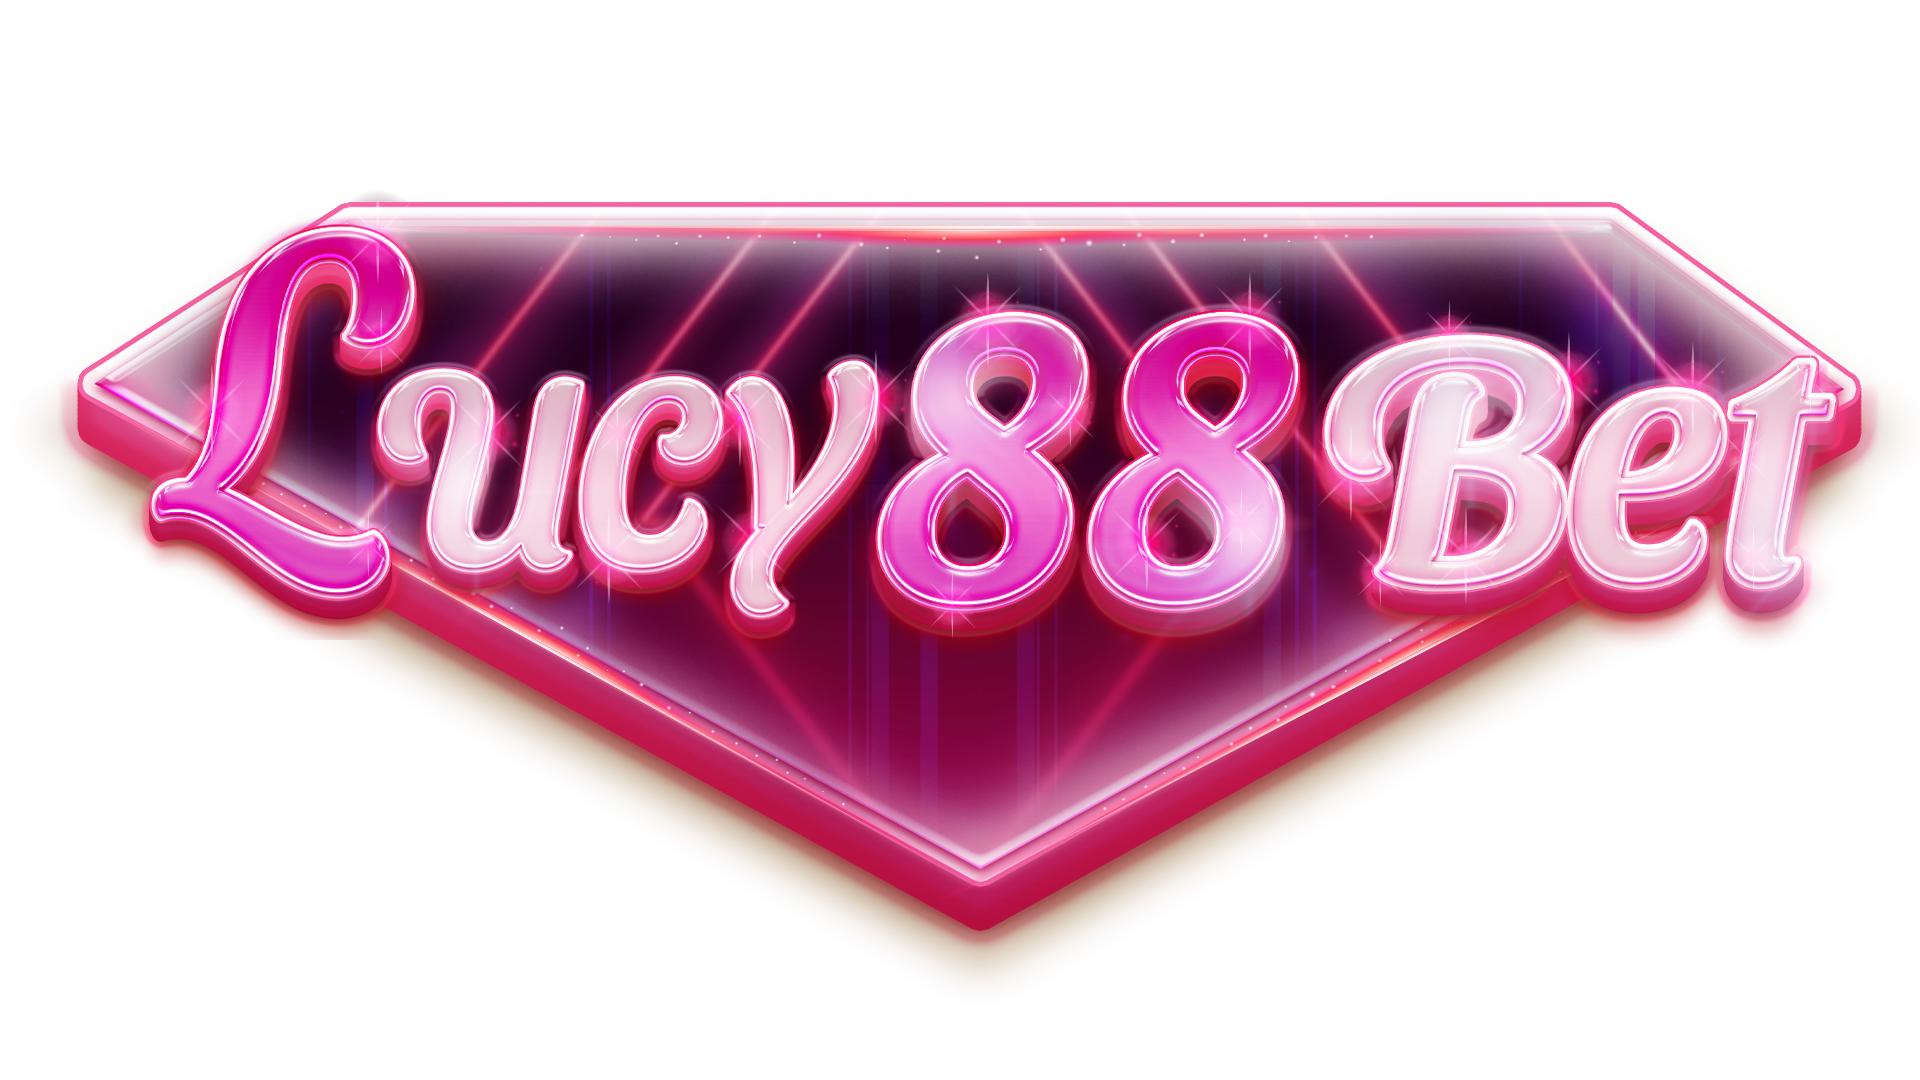 Lucy88bet